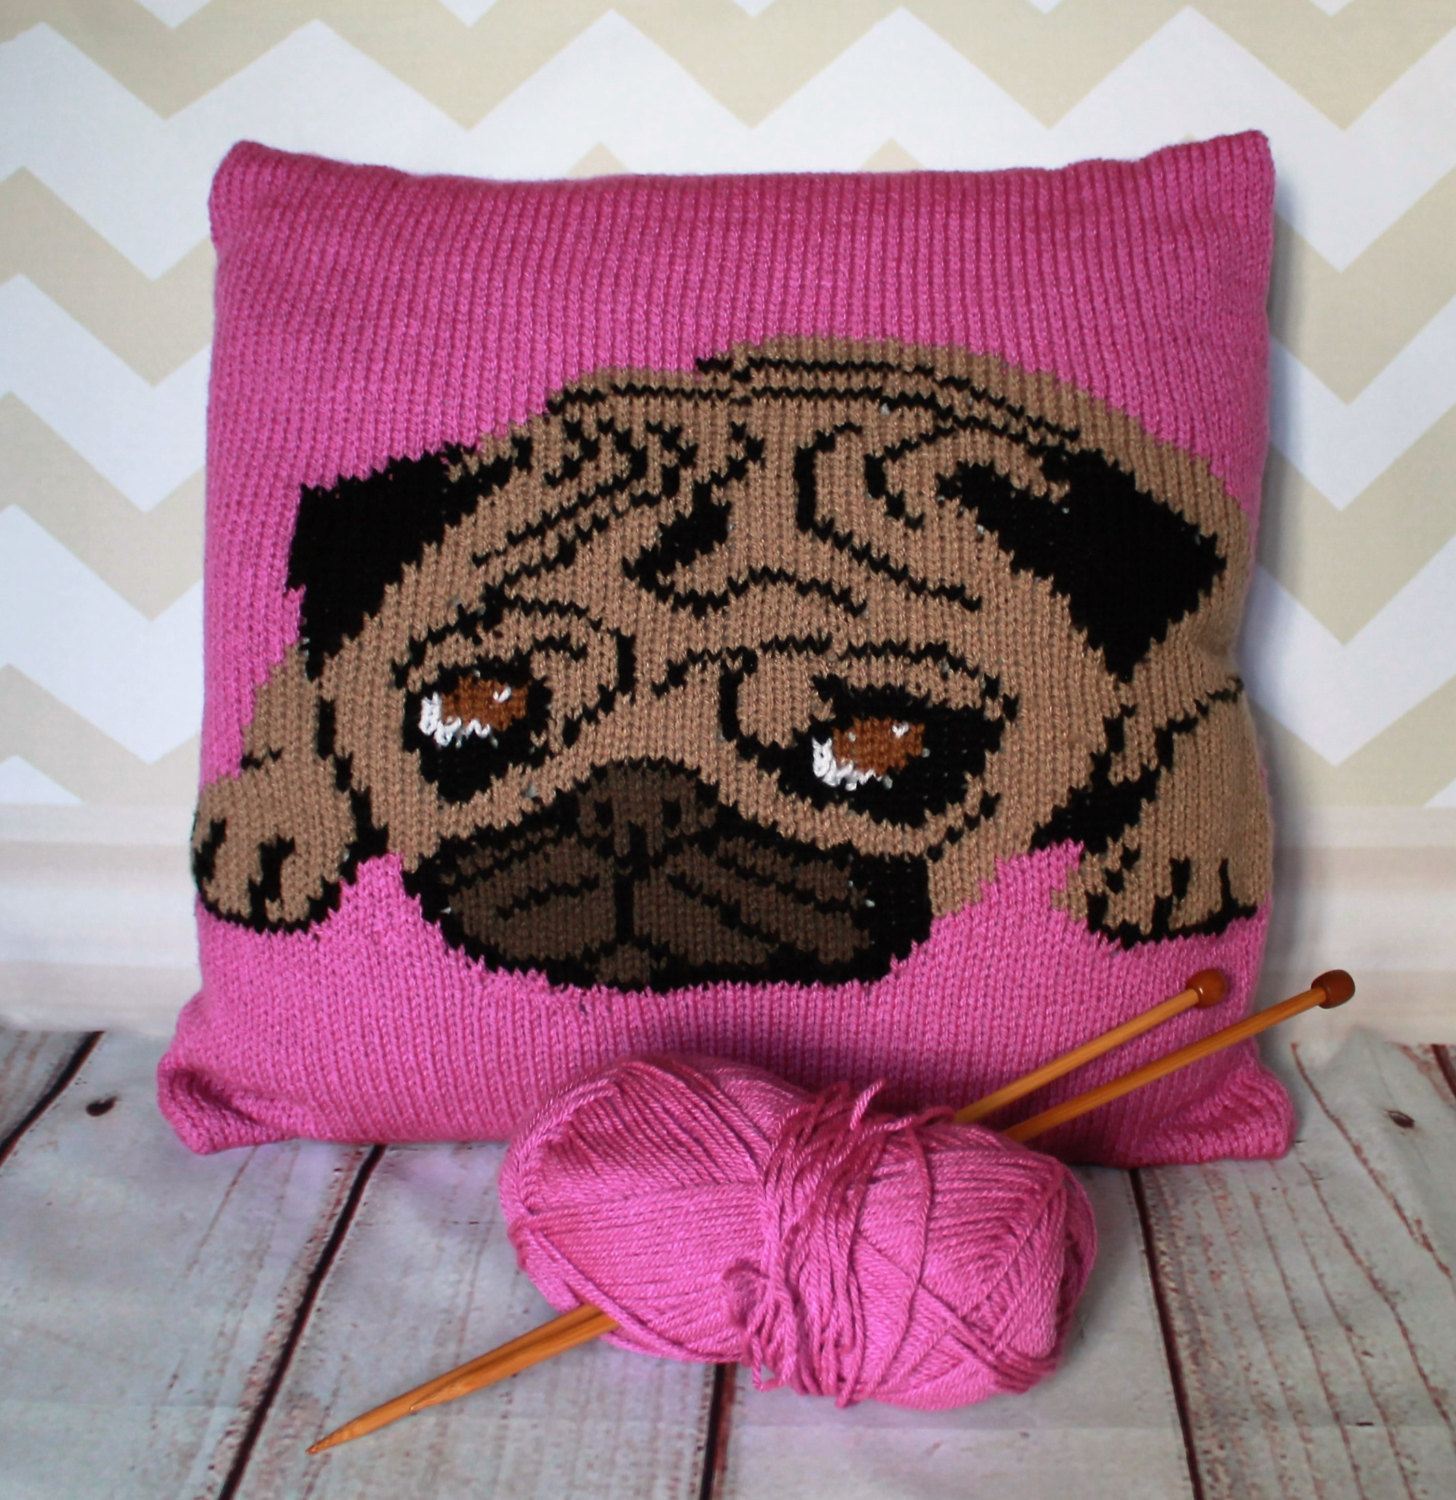 Knitted Pug Pattern Knitting Pattern Pdf Download Percy The Pug Pet Portrait Pillow Cushion Cover